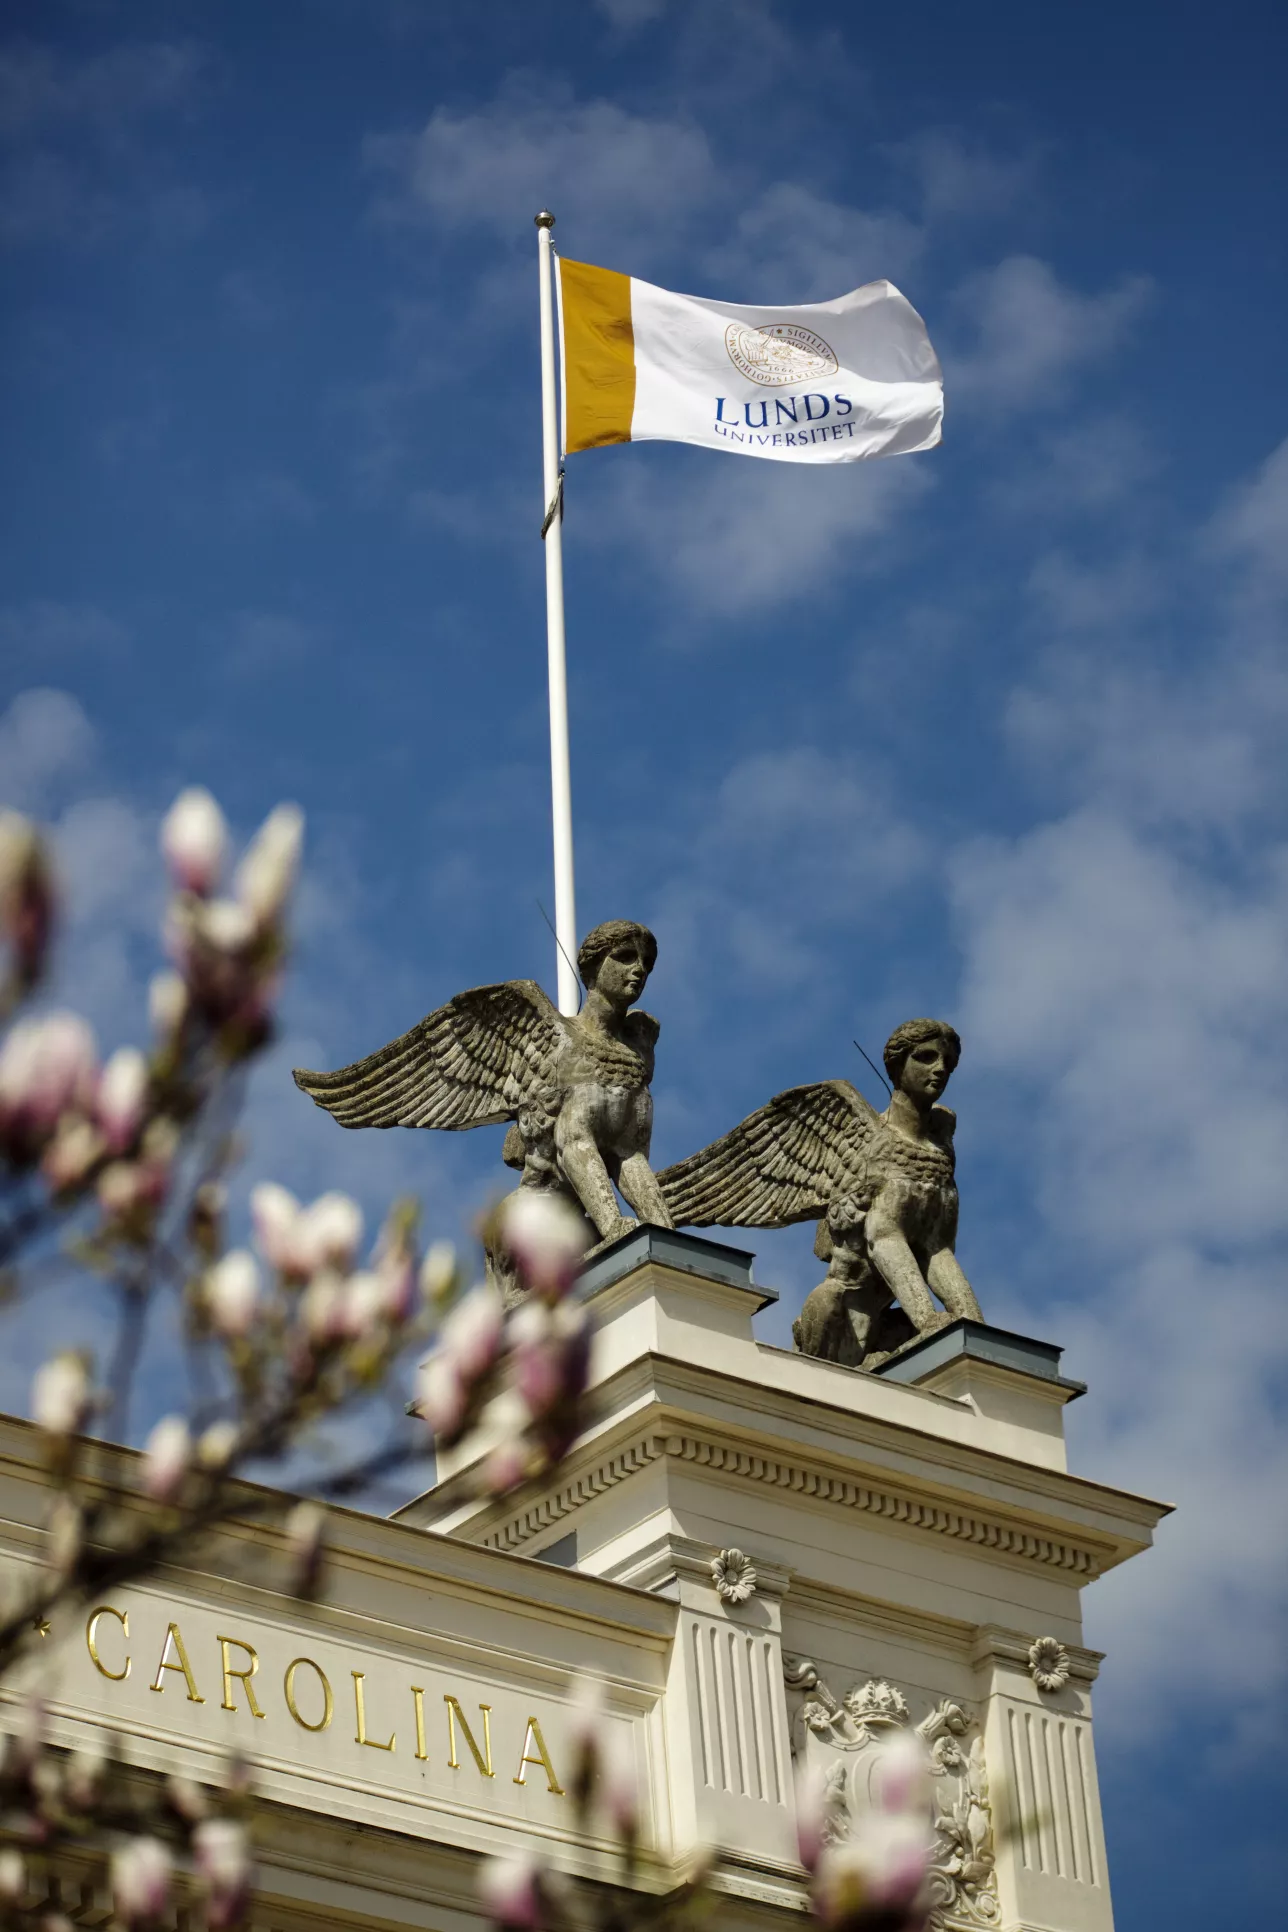 Photo of the Lund University sphinx statues with the Lund University flag